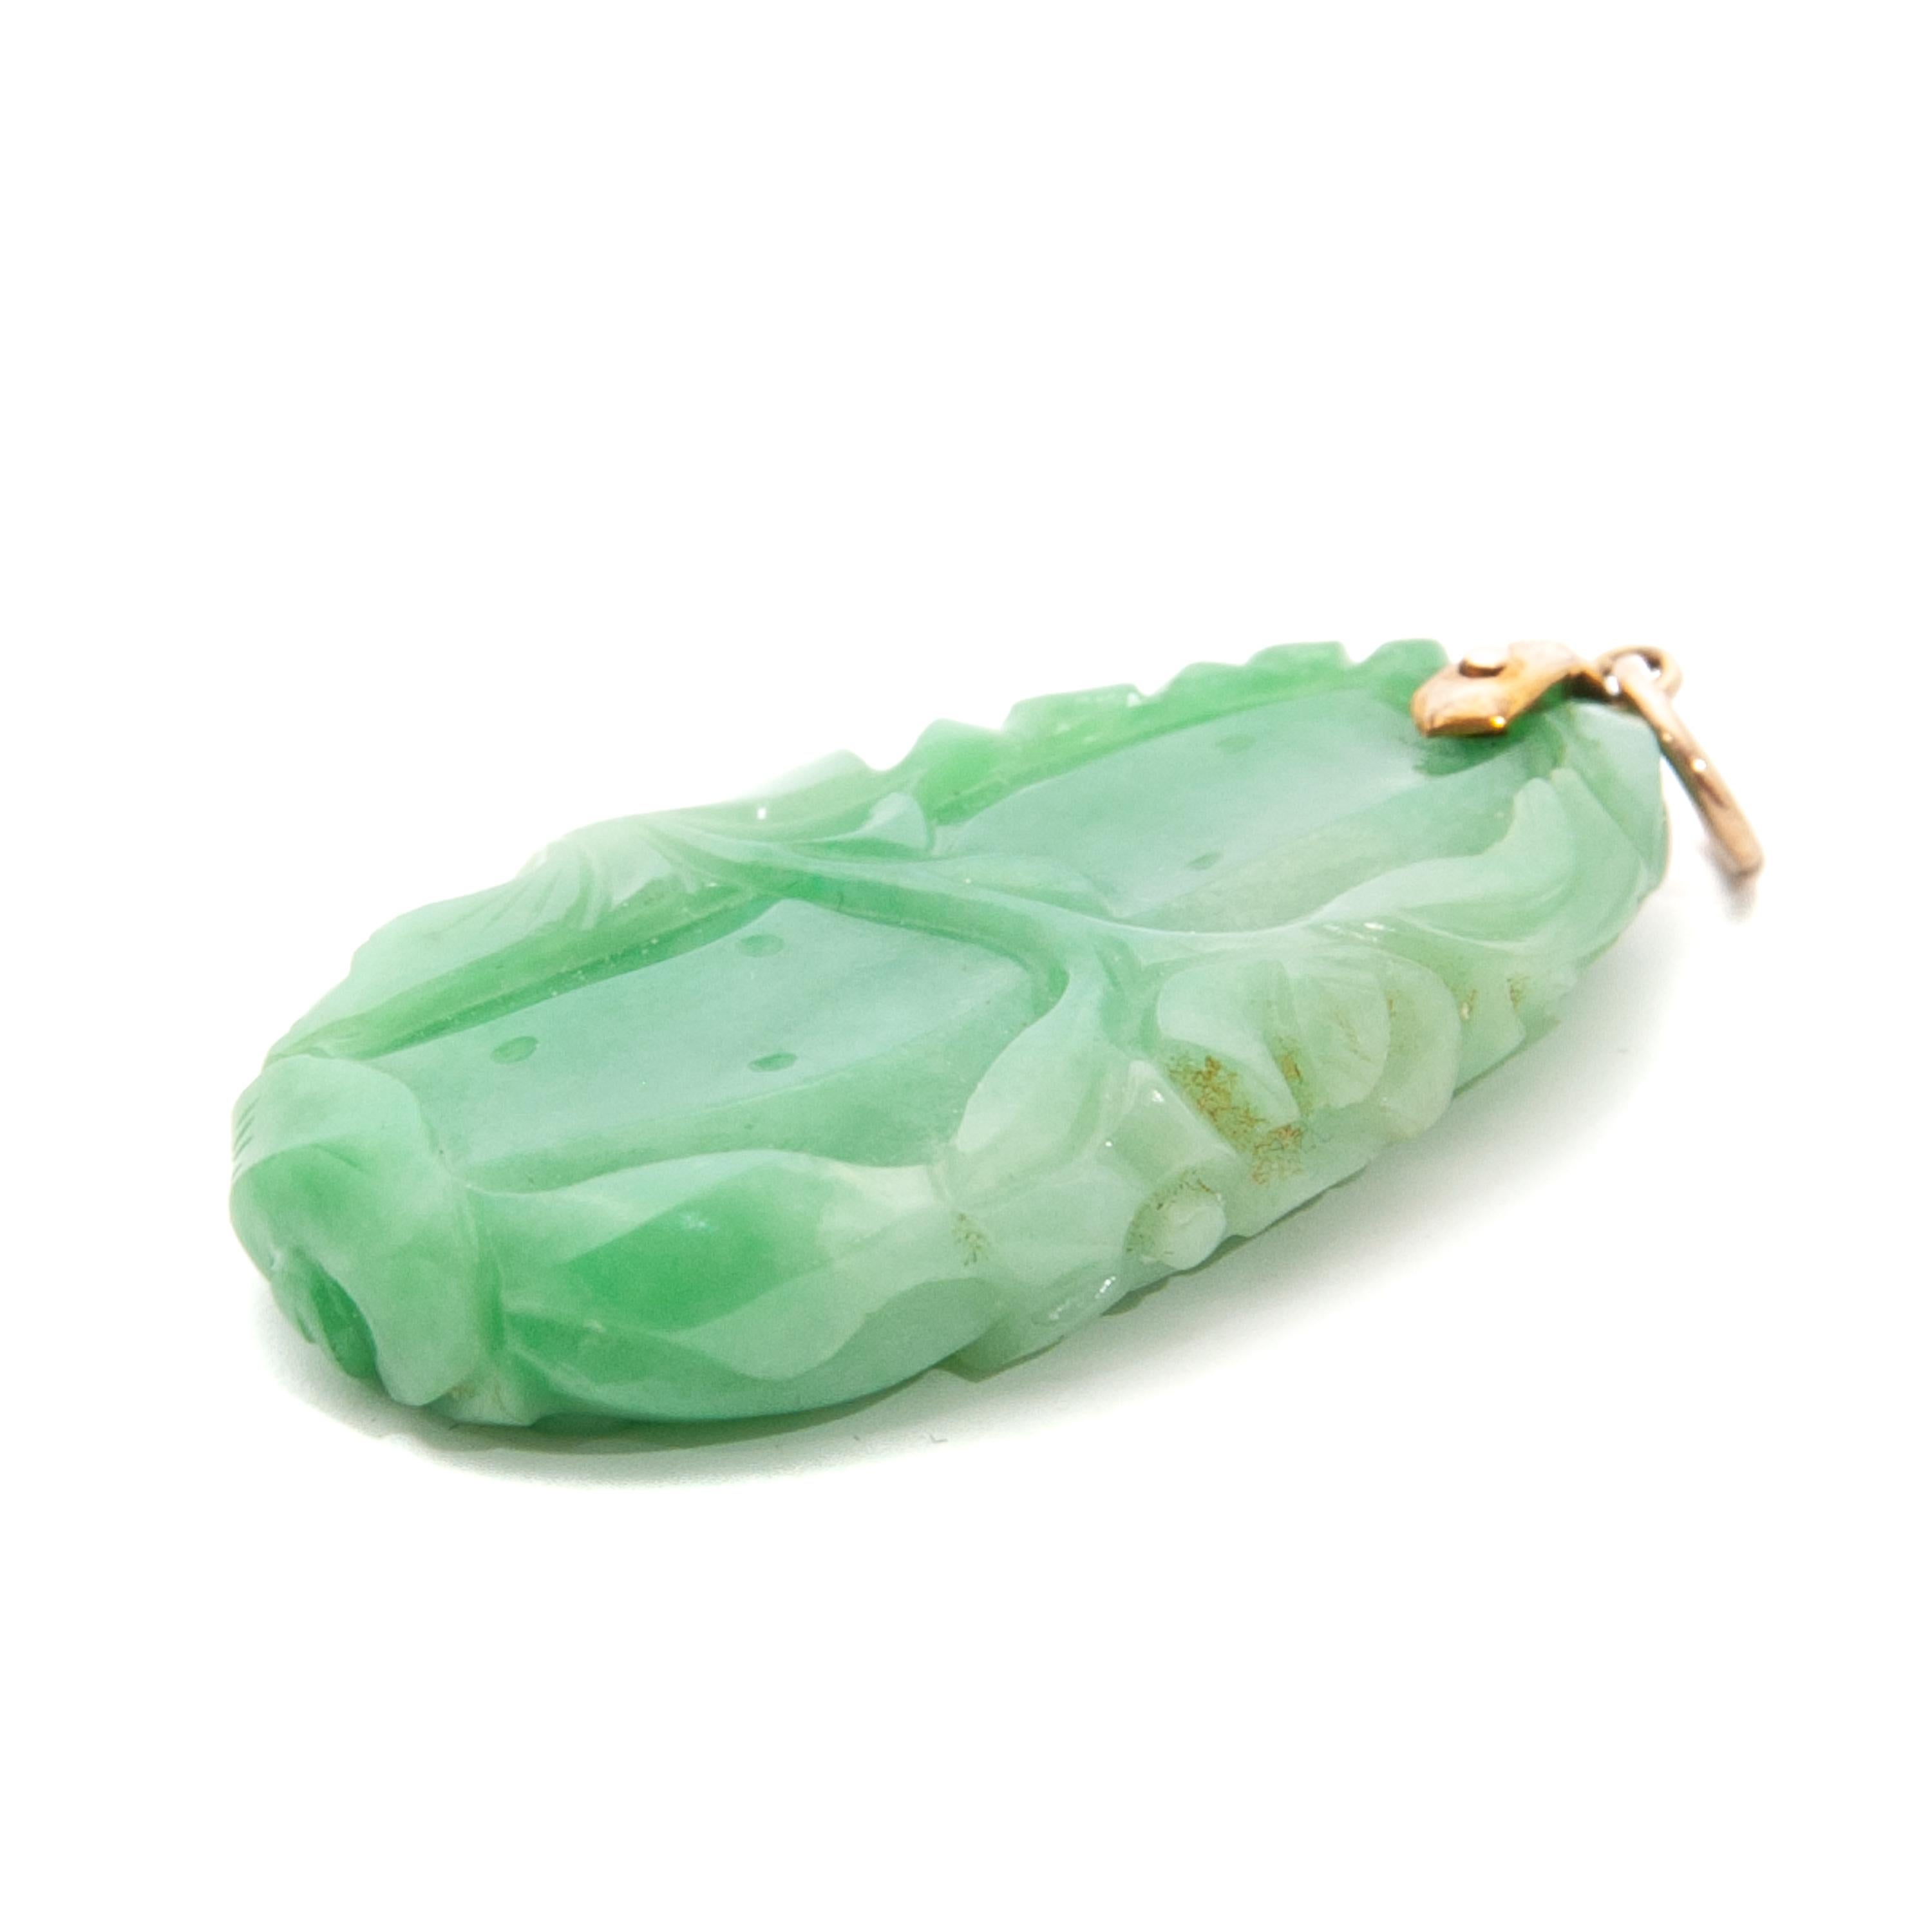 Fish and Floral Carved Green Jade Pendant 2